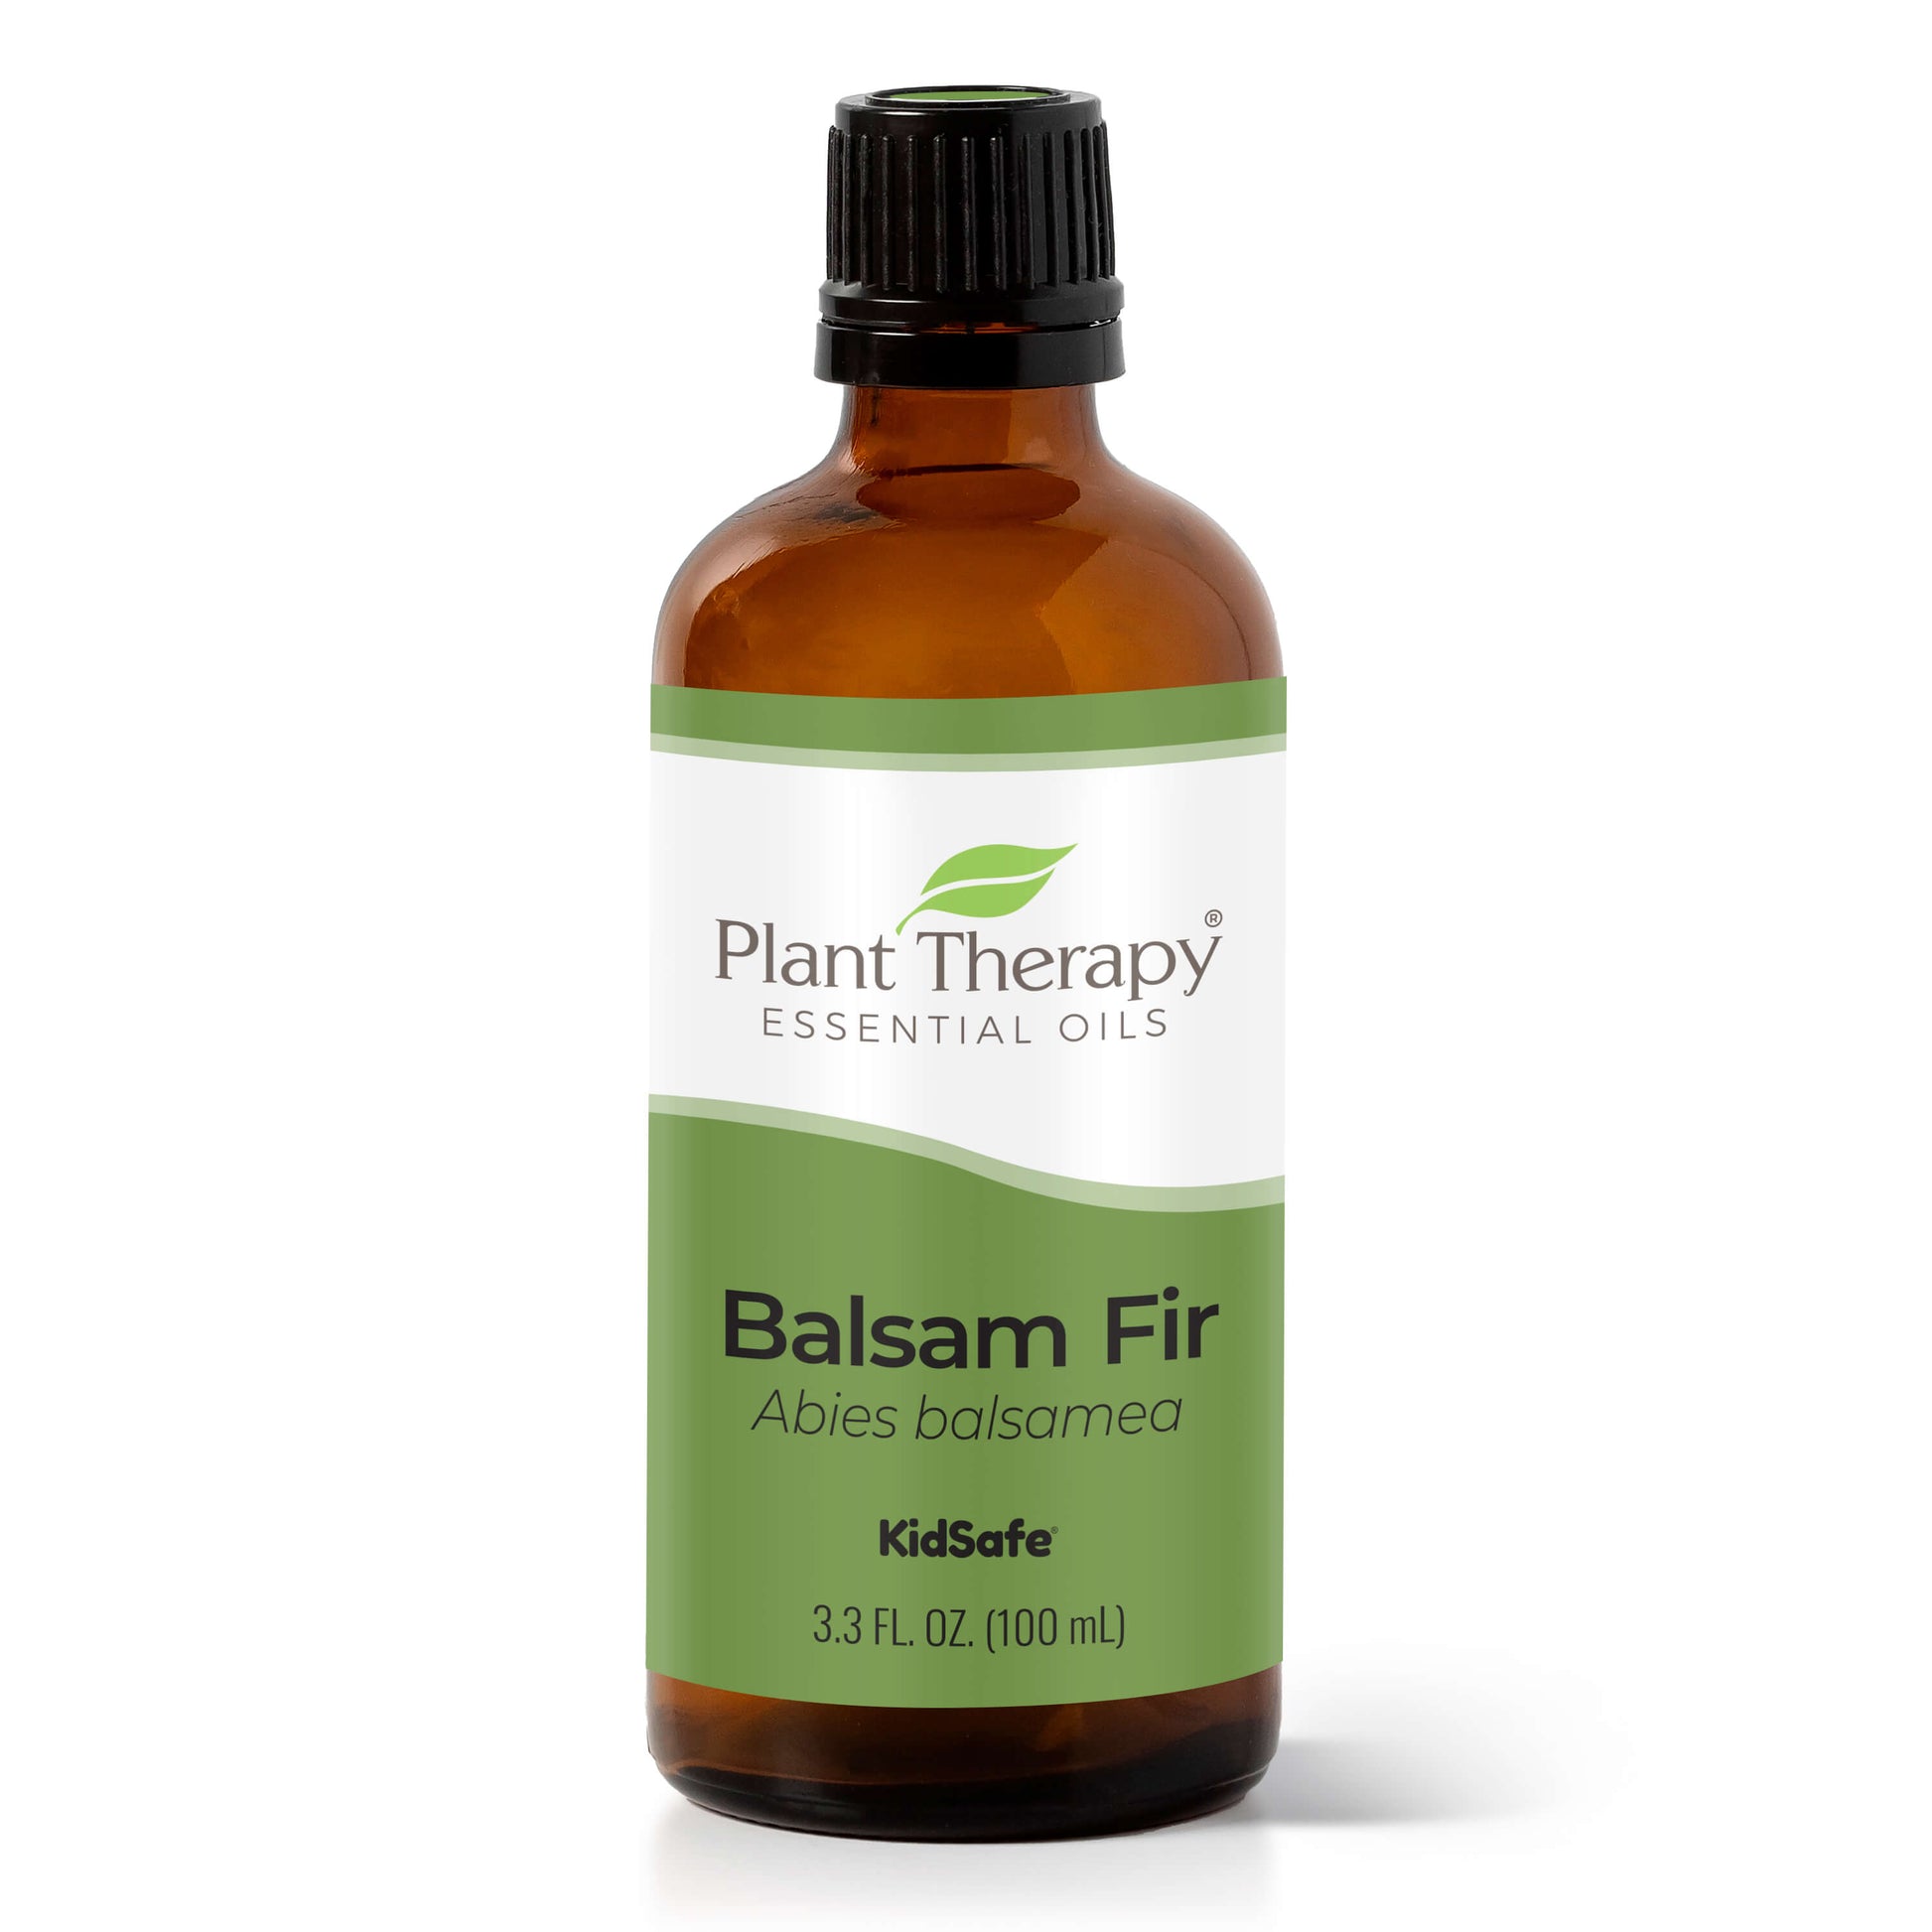 Balsam Fir Essential Oil – Plant Therapy